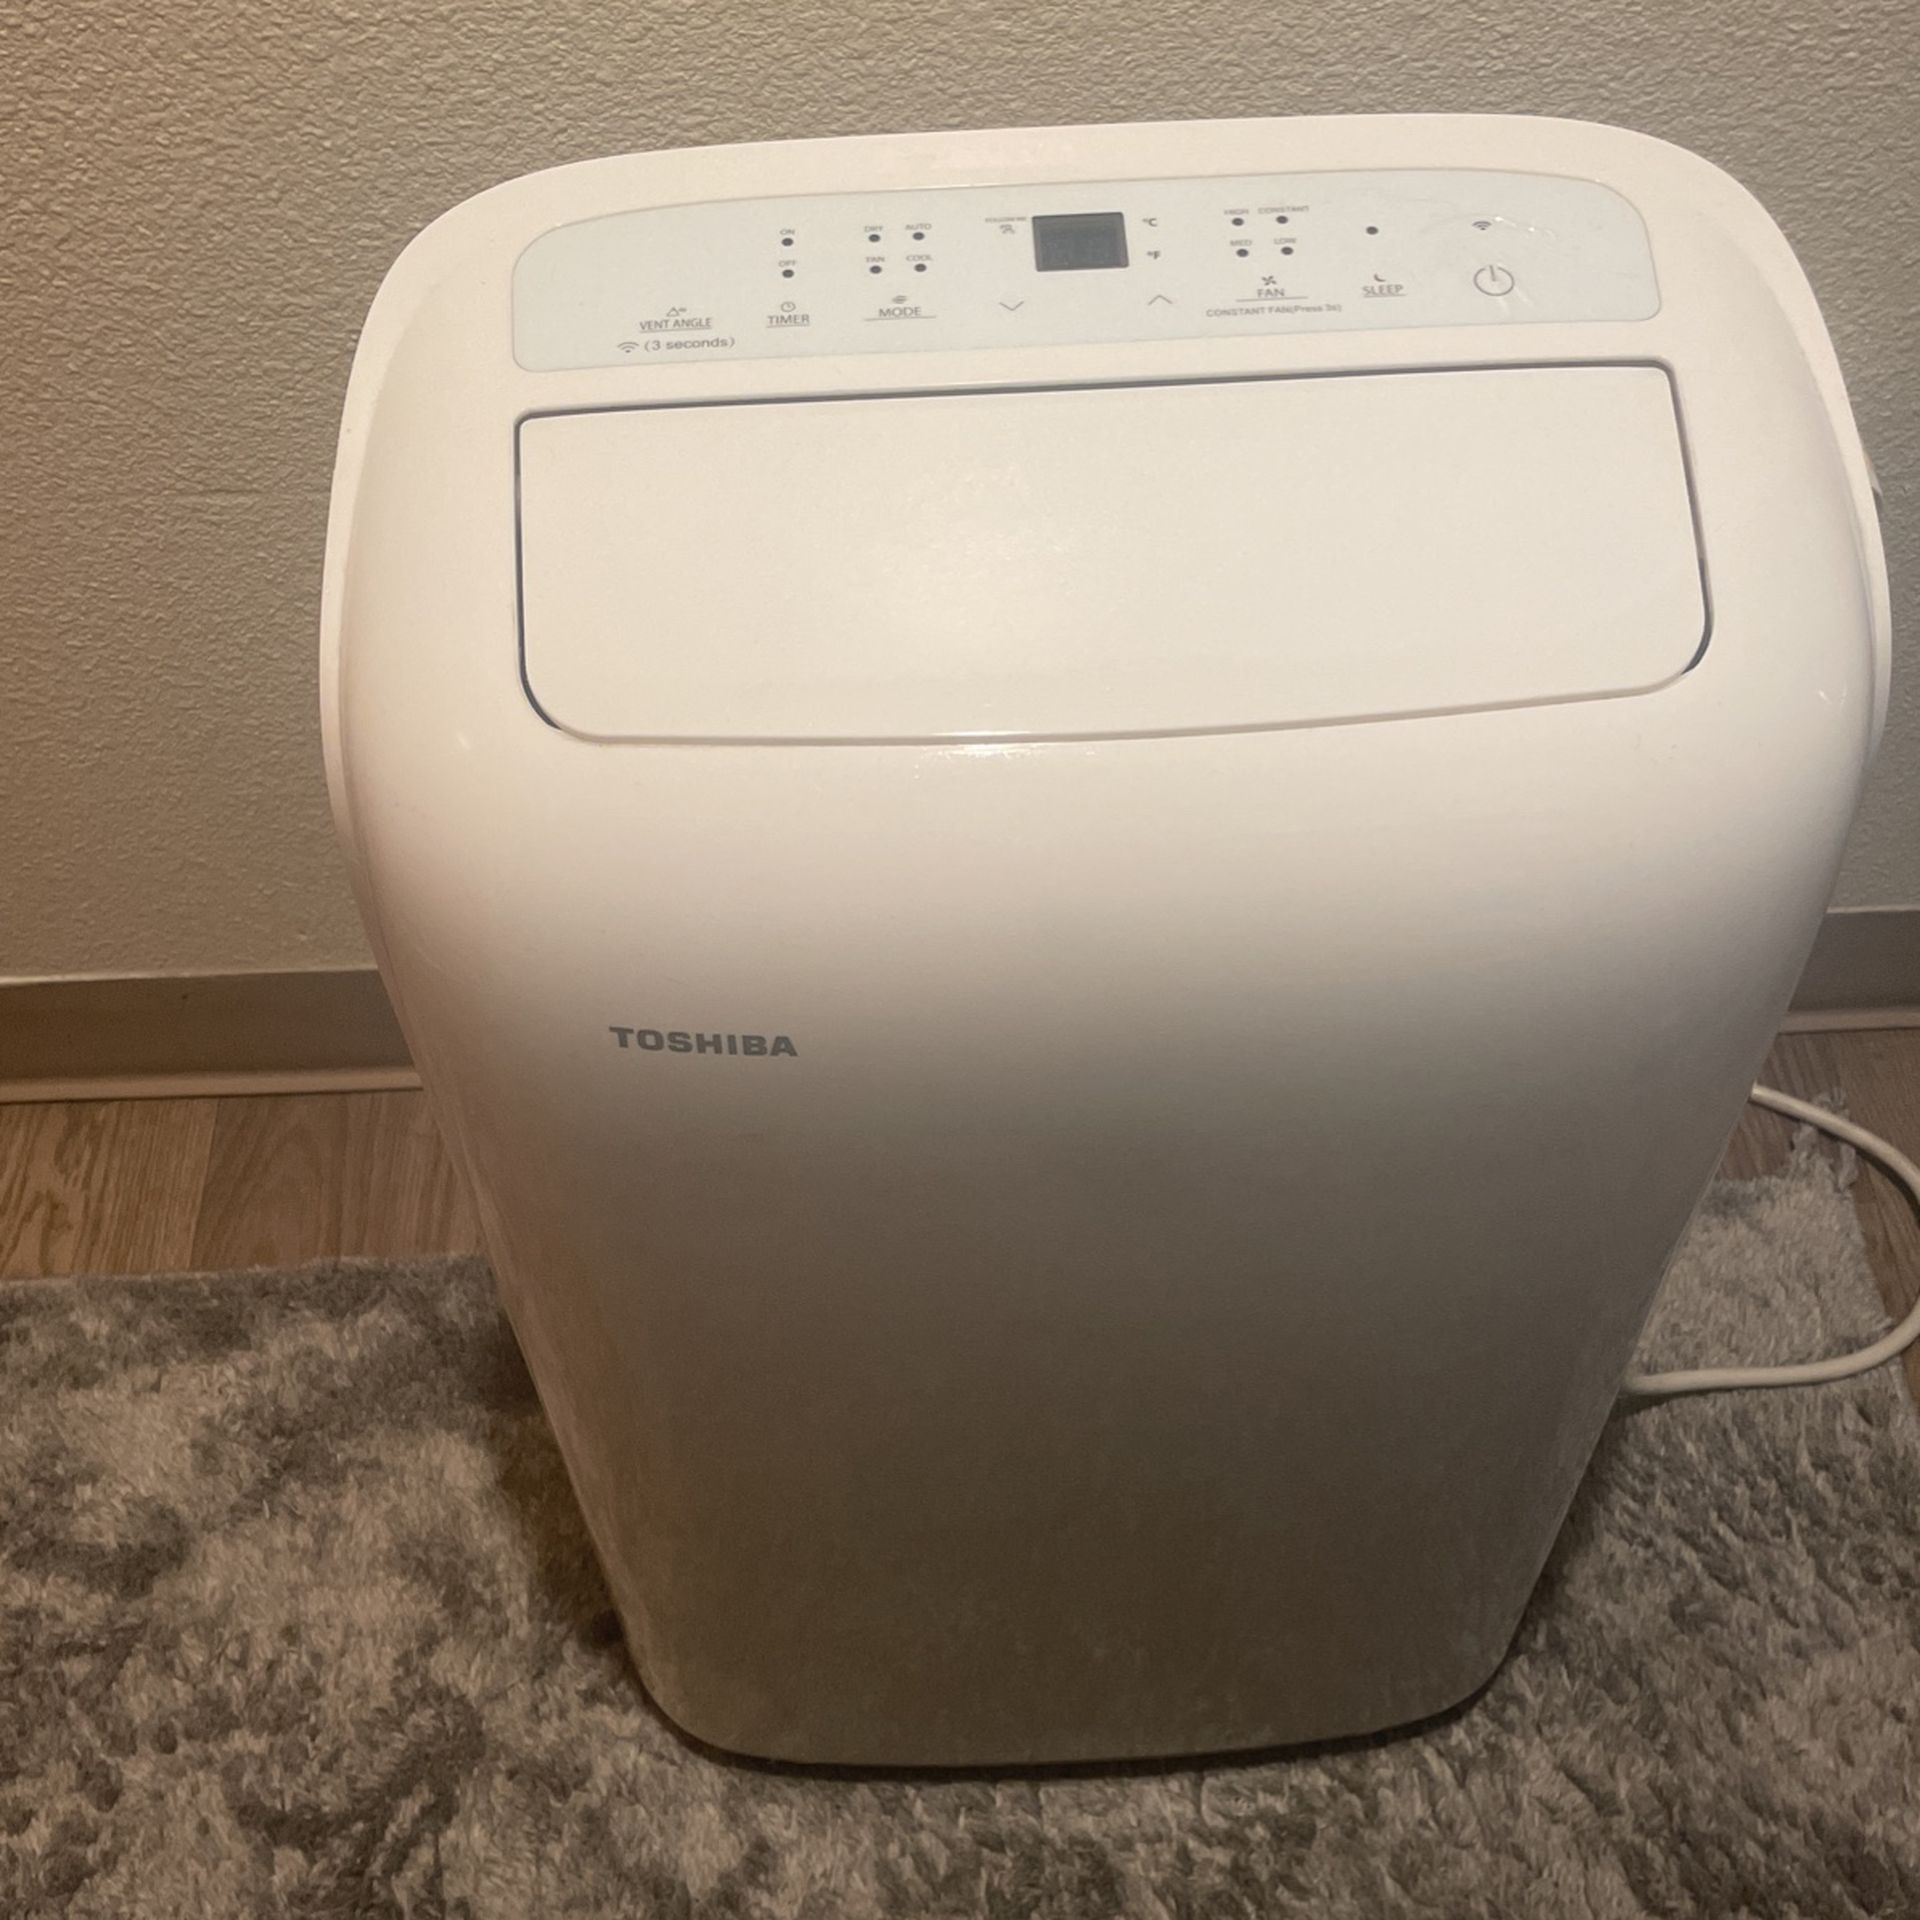 Ac Works Great 150 OBO